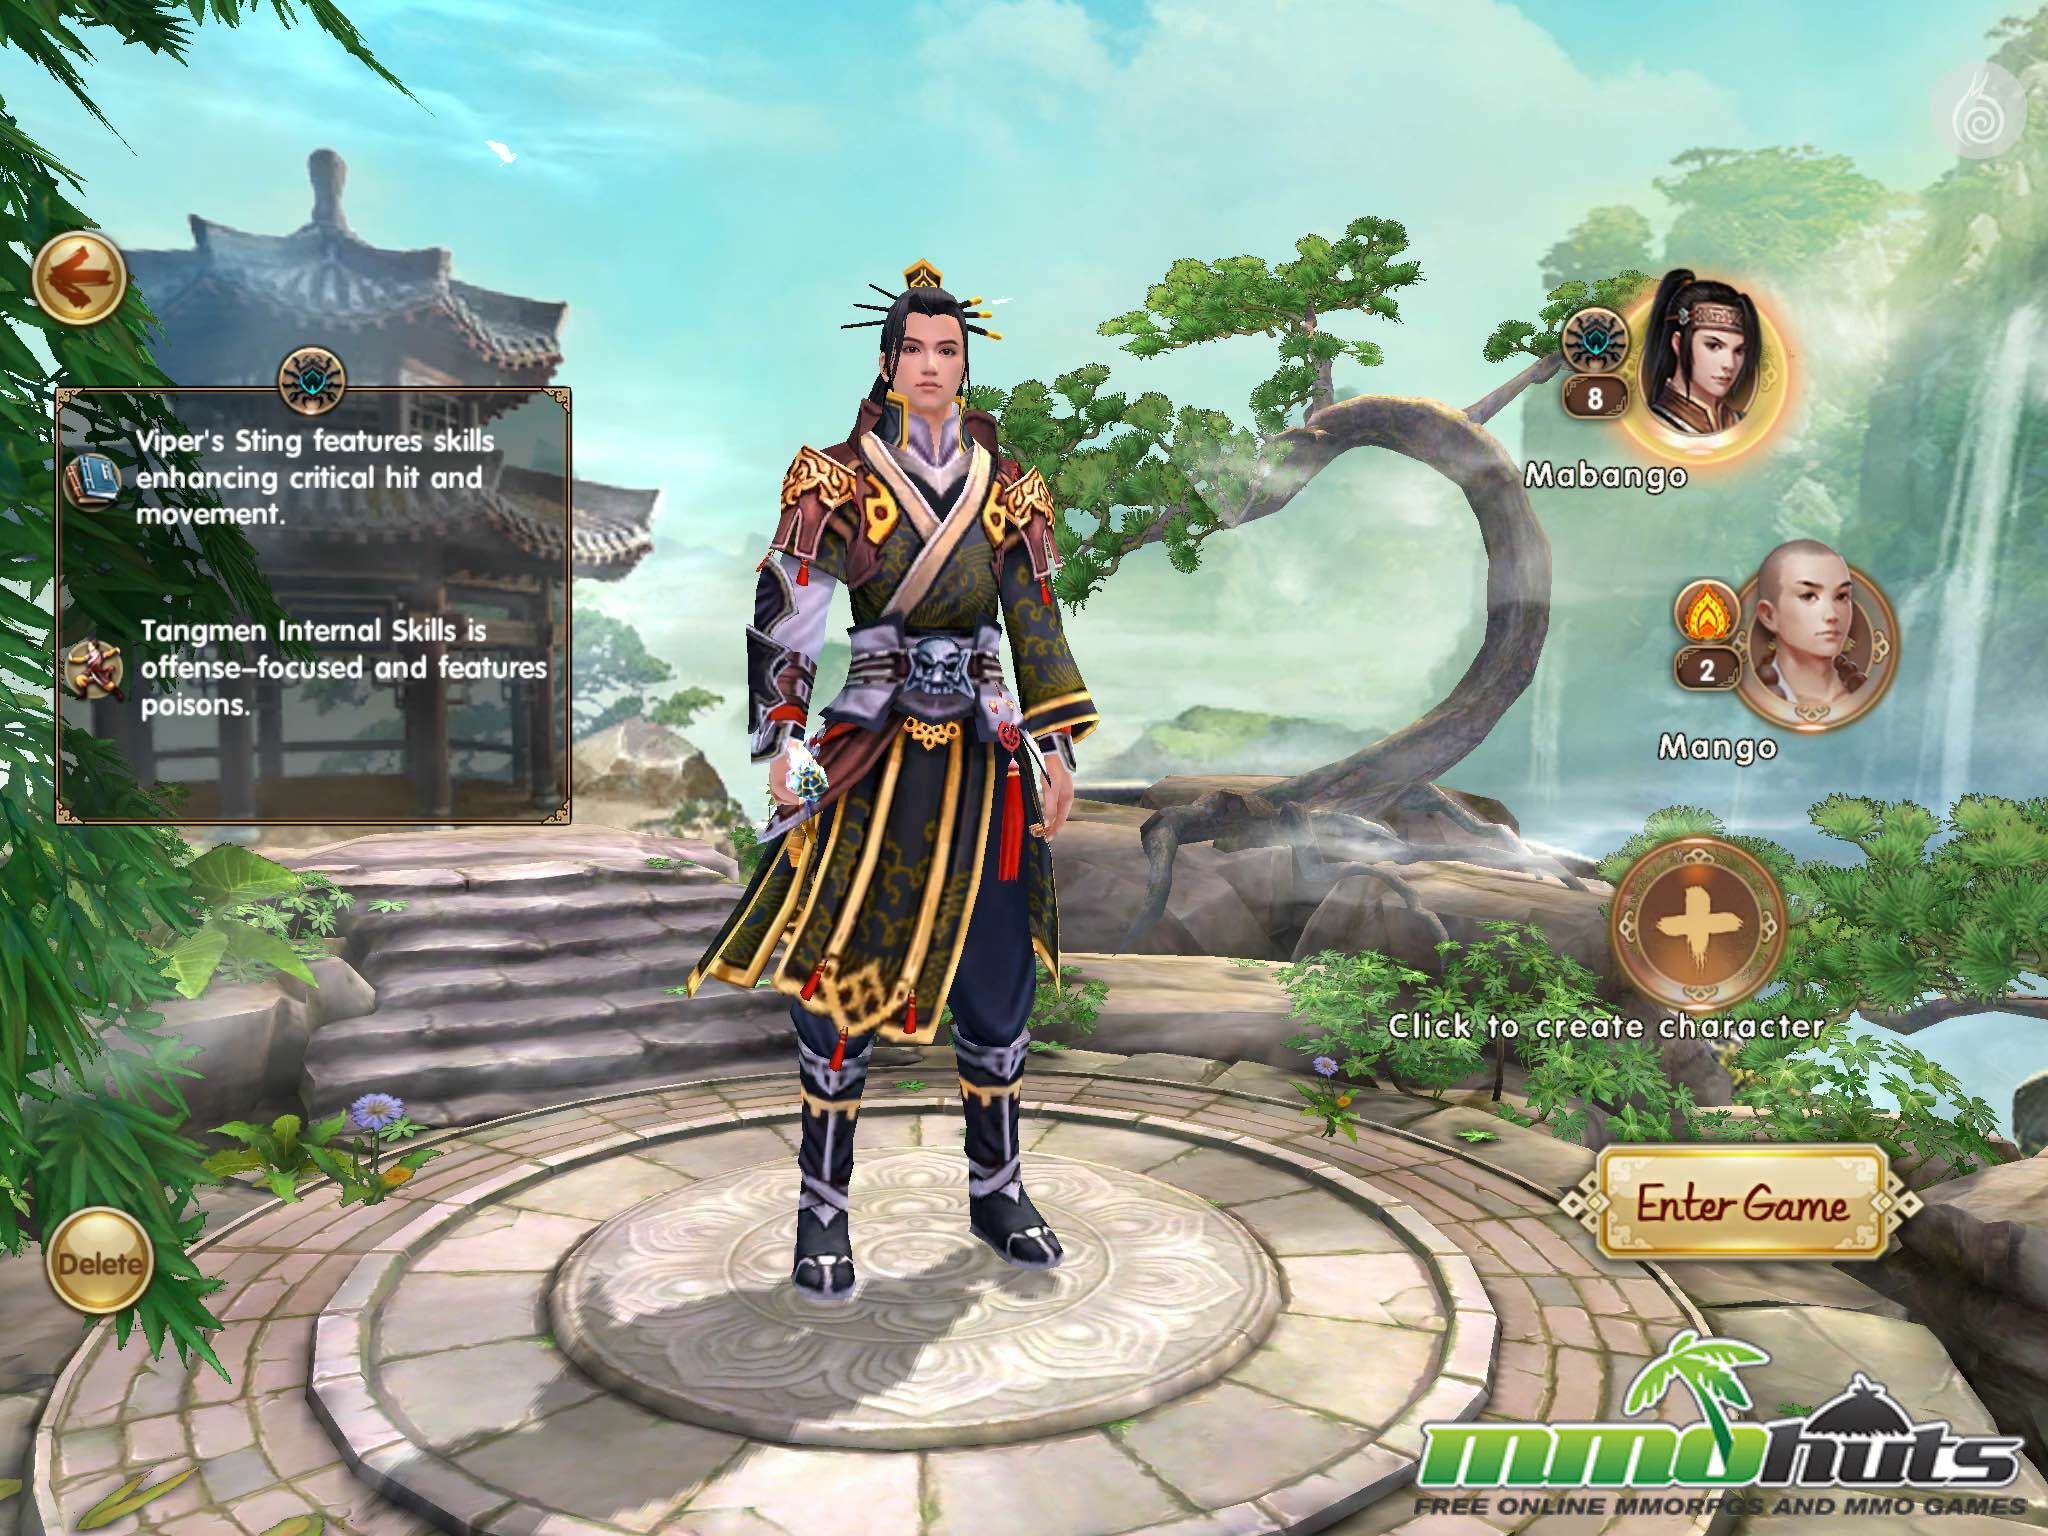 age of wushu 6th inner guide